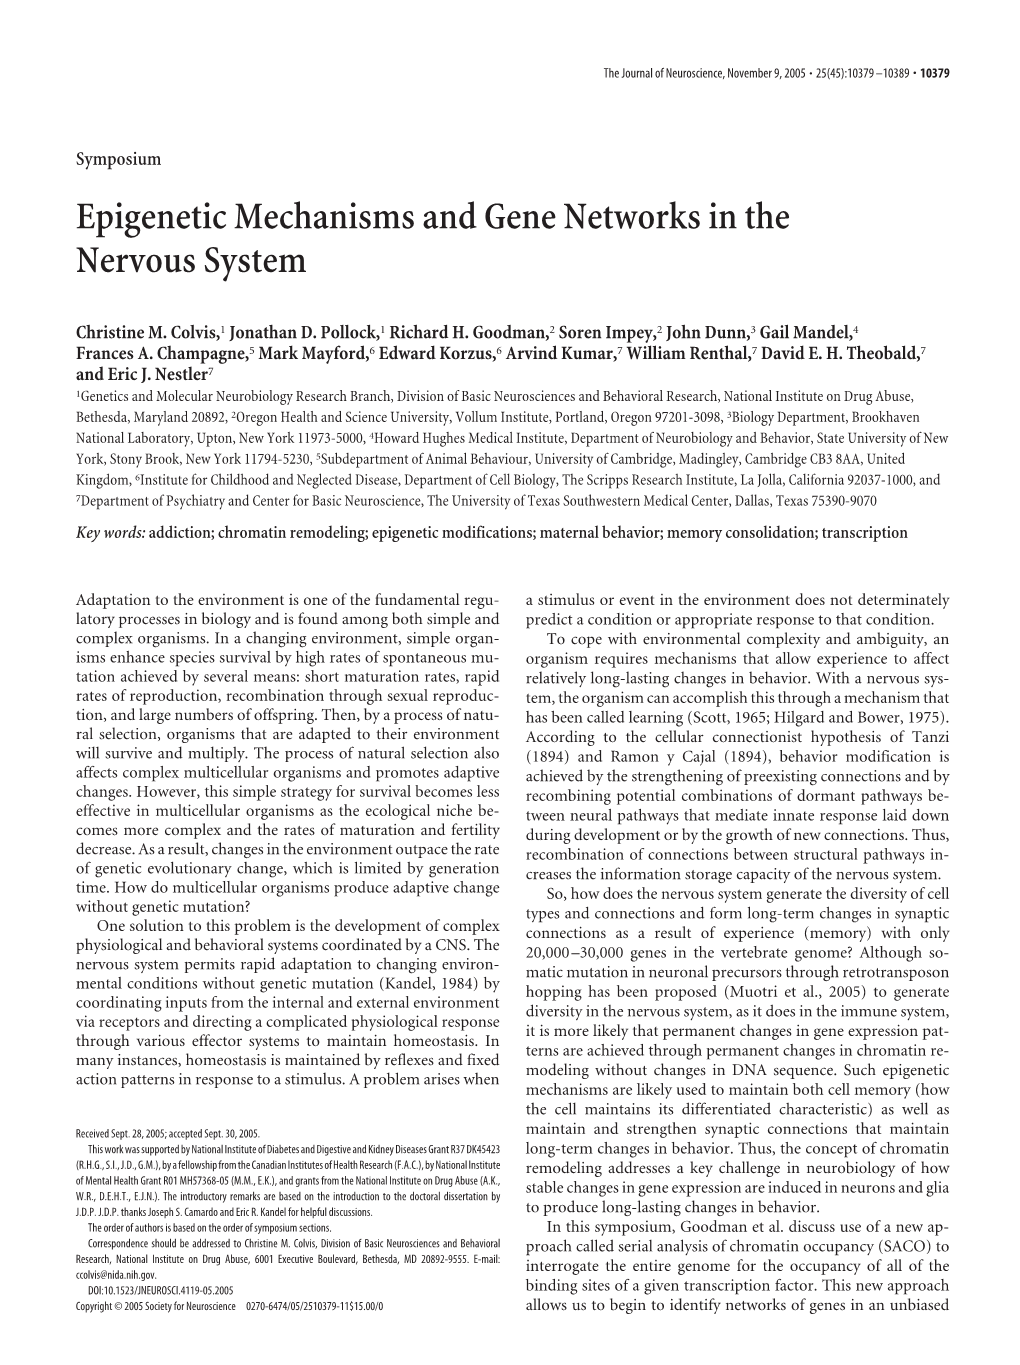 Epigenetic Mechanisms and Gene Networks in the Nervous System